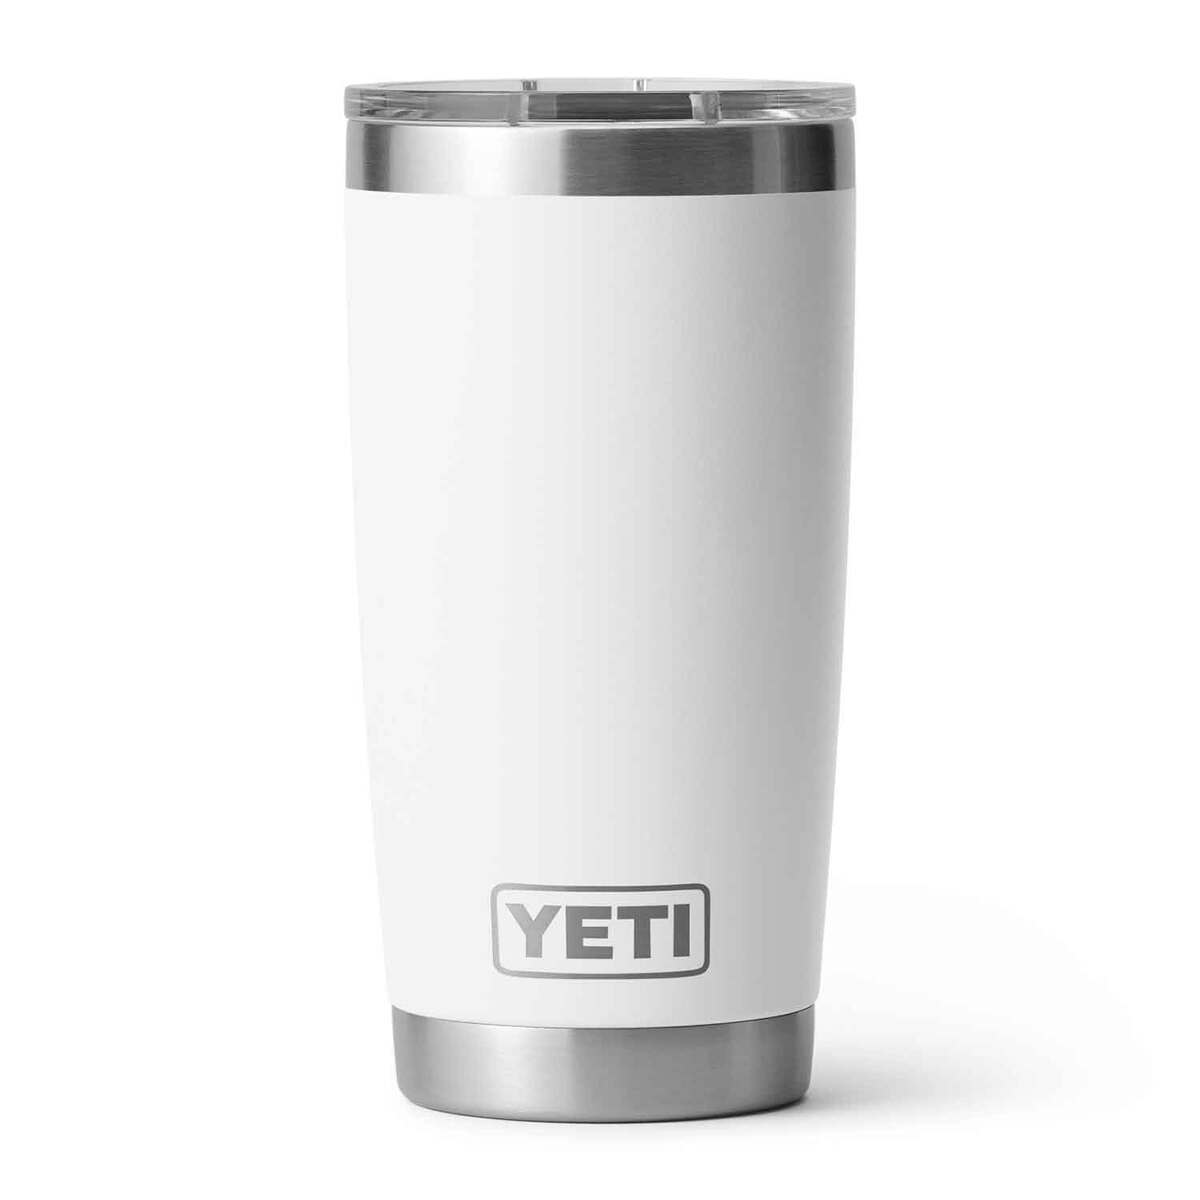 YETI Rambler 20 oz. Insulated Tumbler Alpine Yellow with Magslider Lid NEW